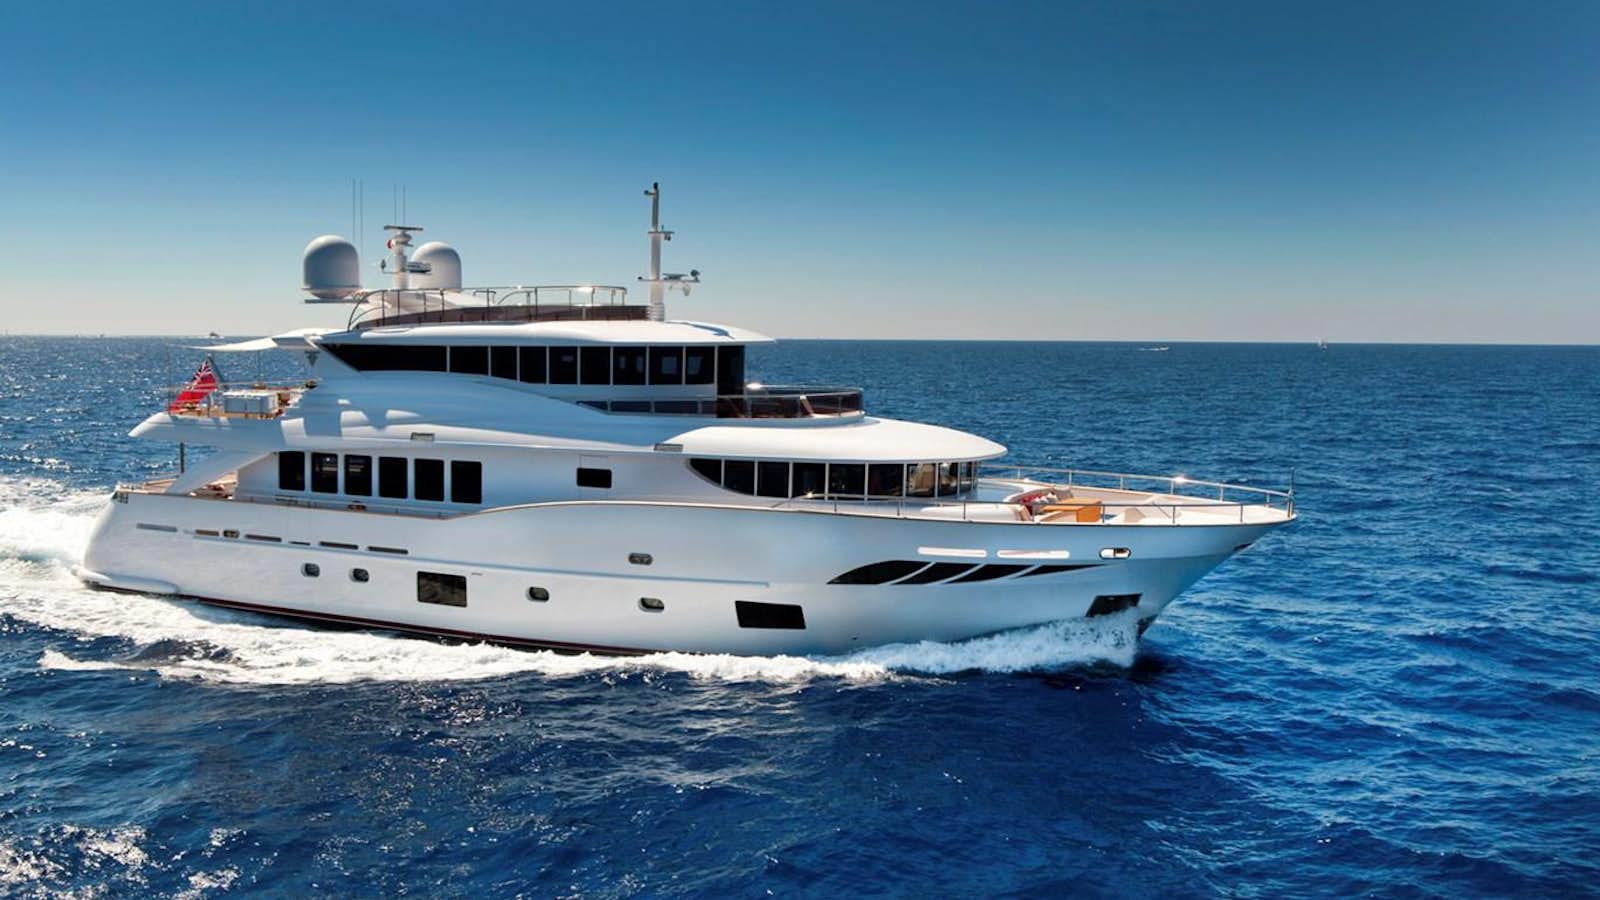 Watch Video for GATSBY Yacht for Sale